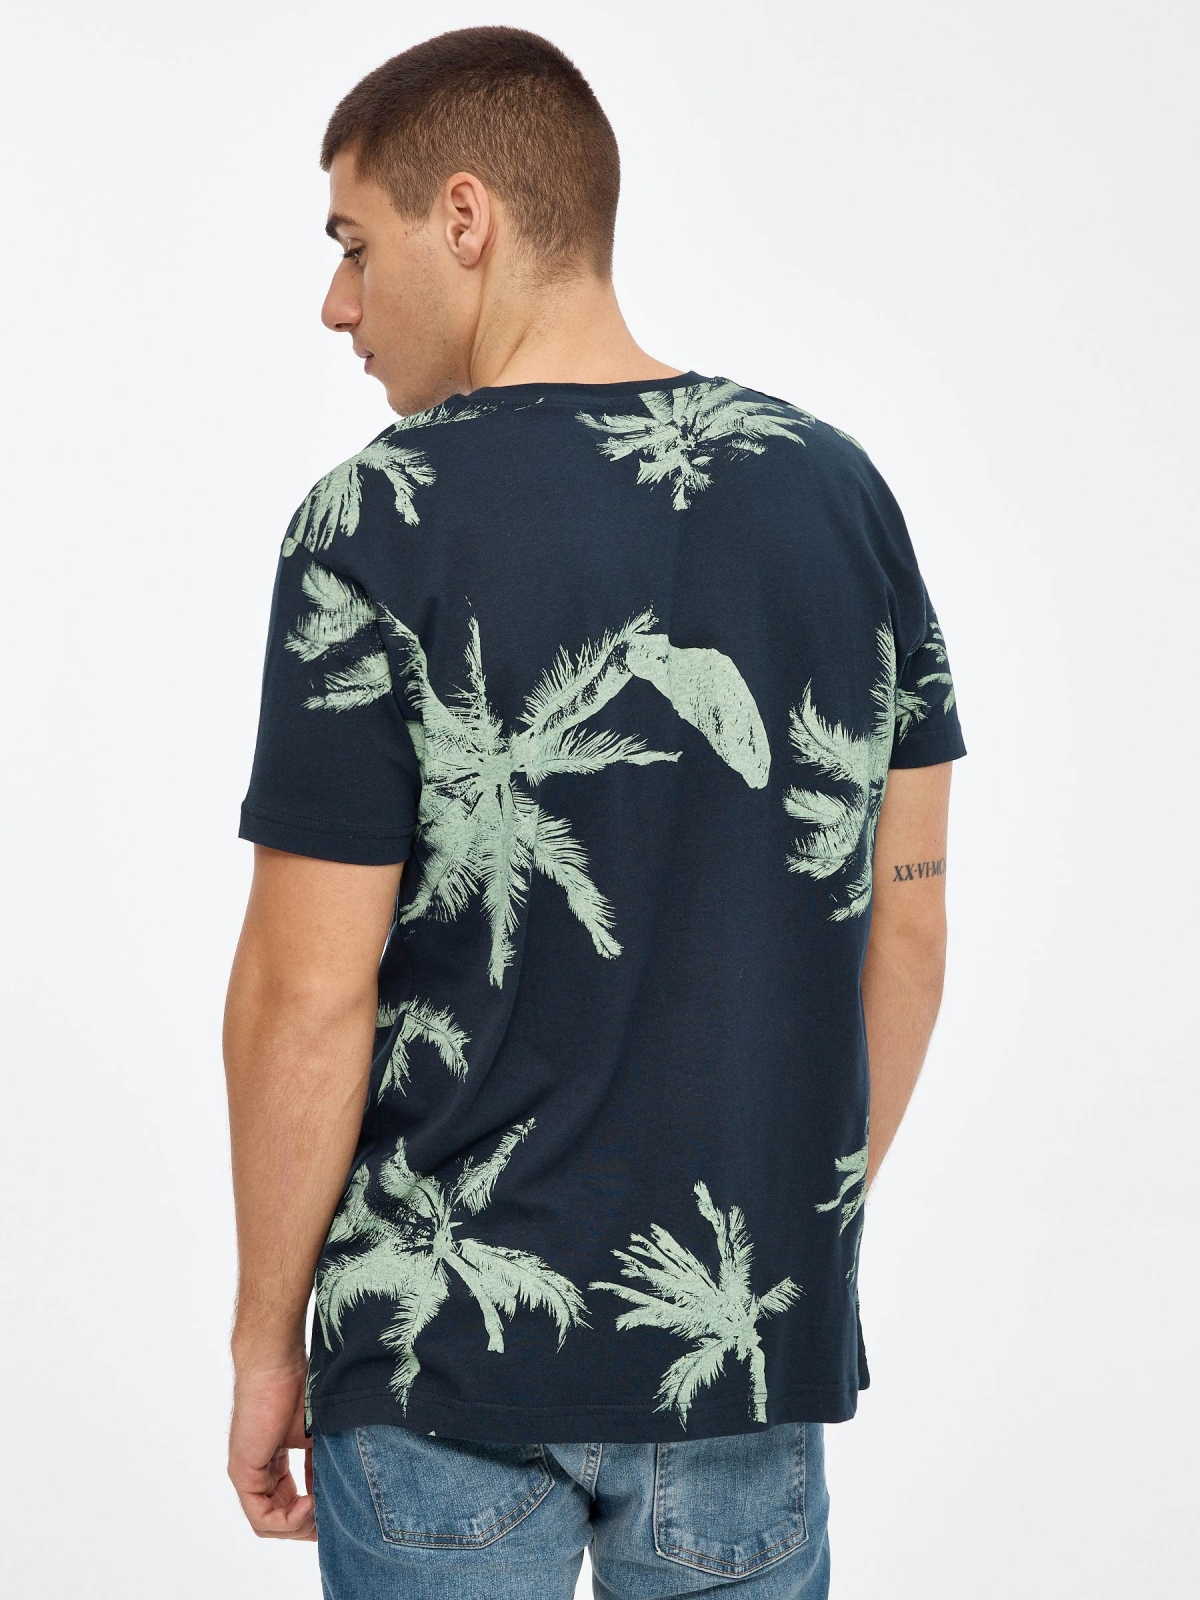 Palm tree printed t-shirt navy middle back view